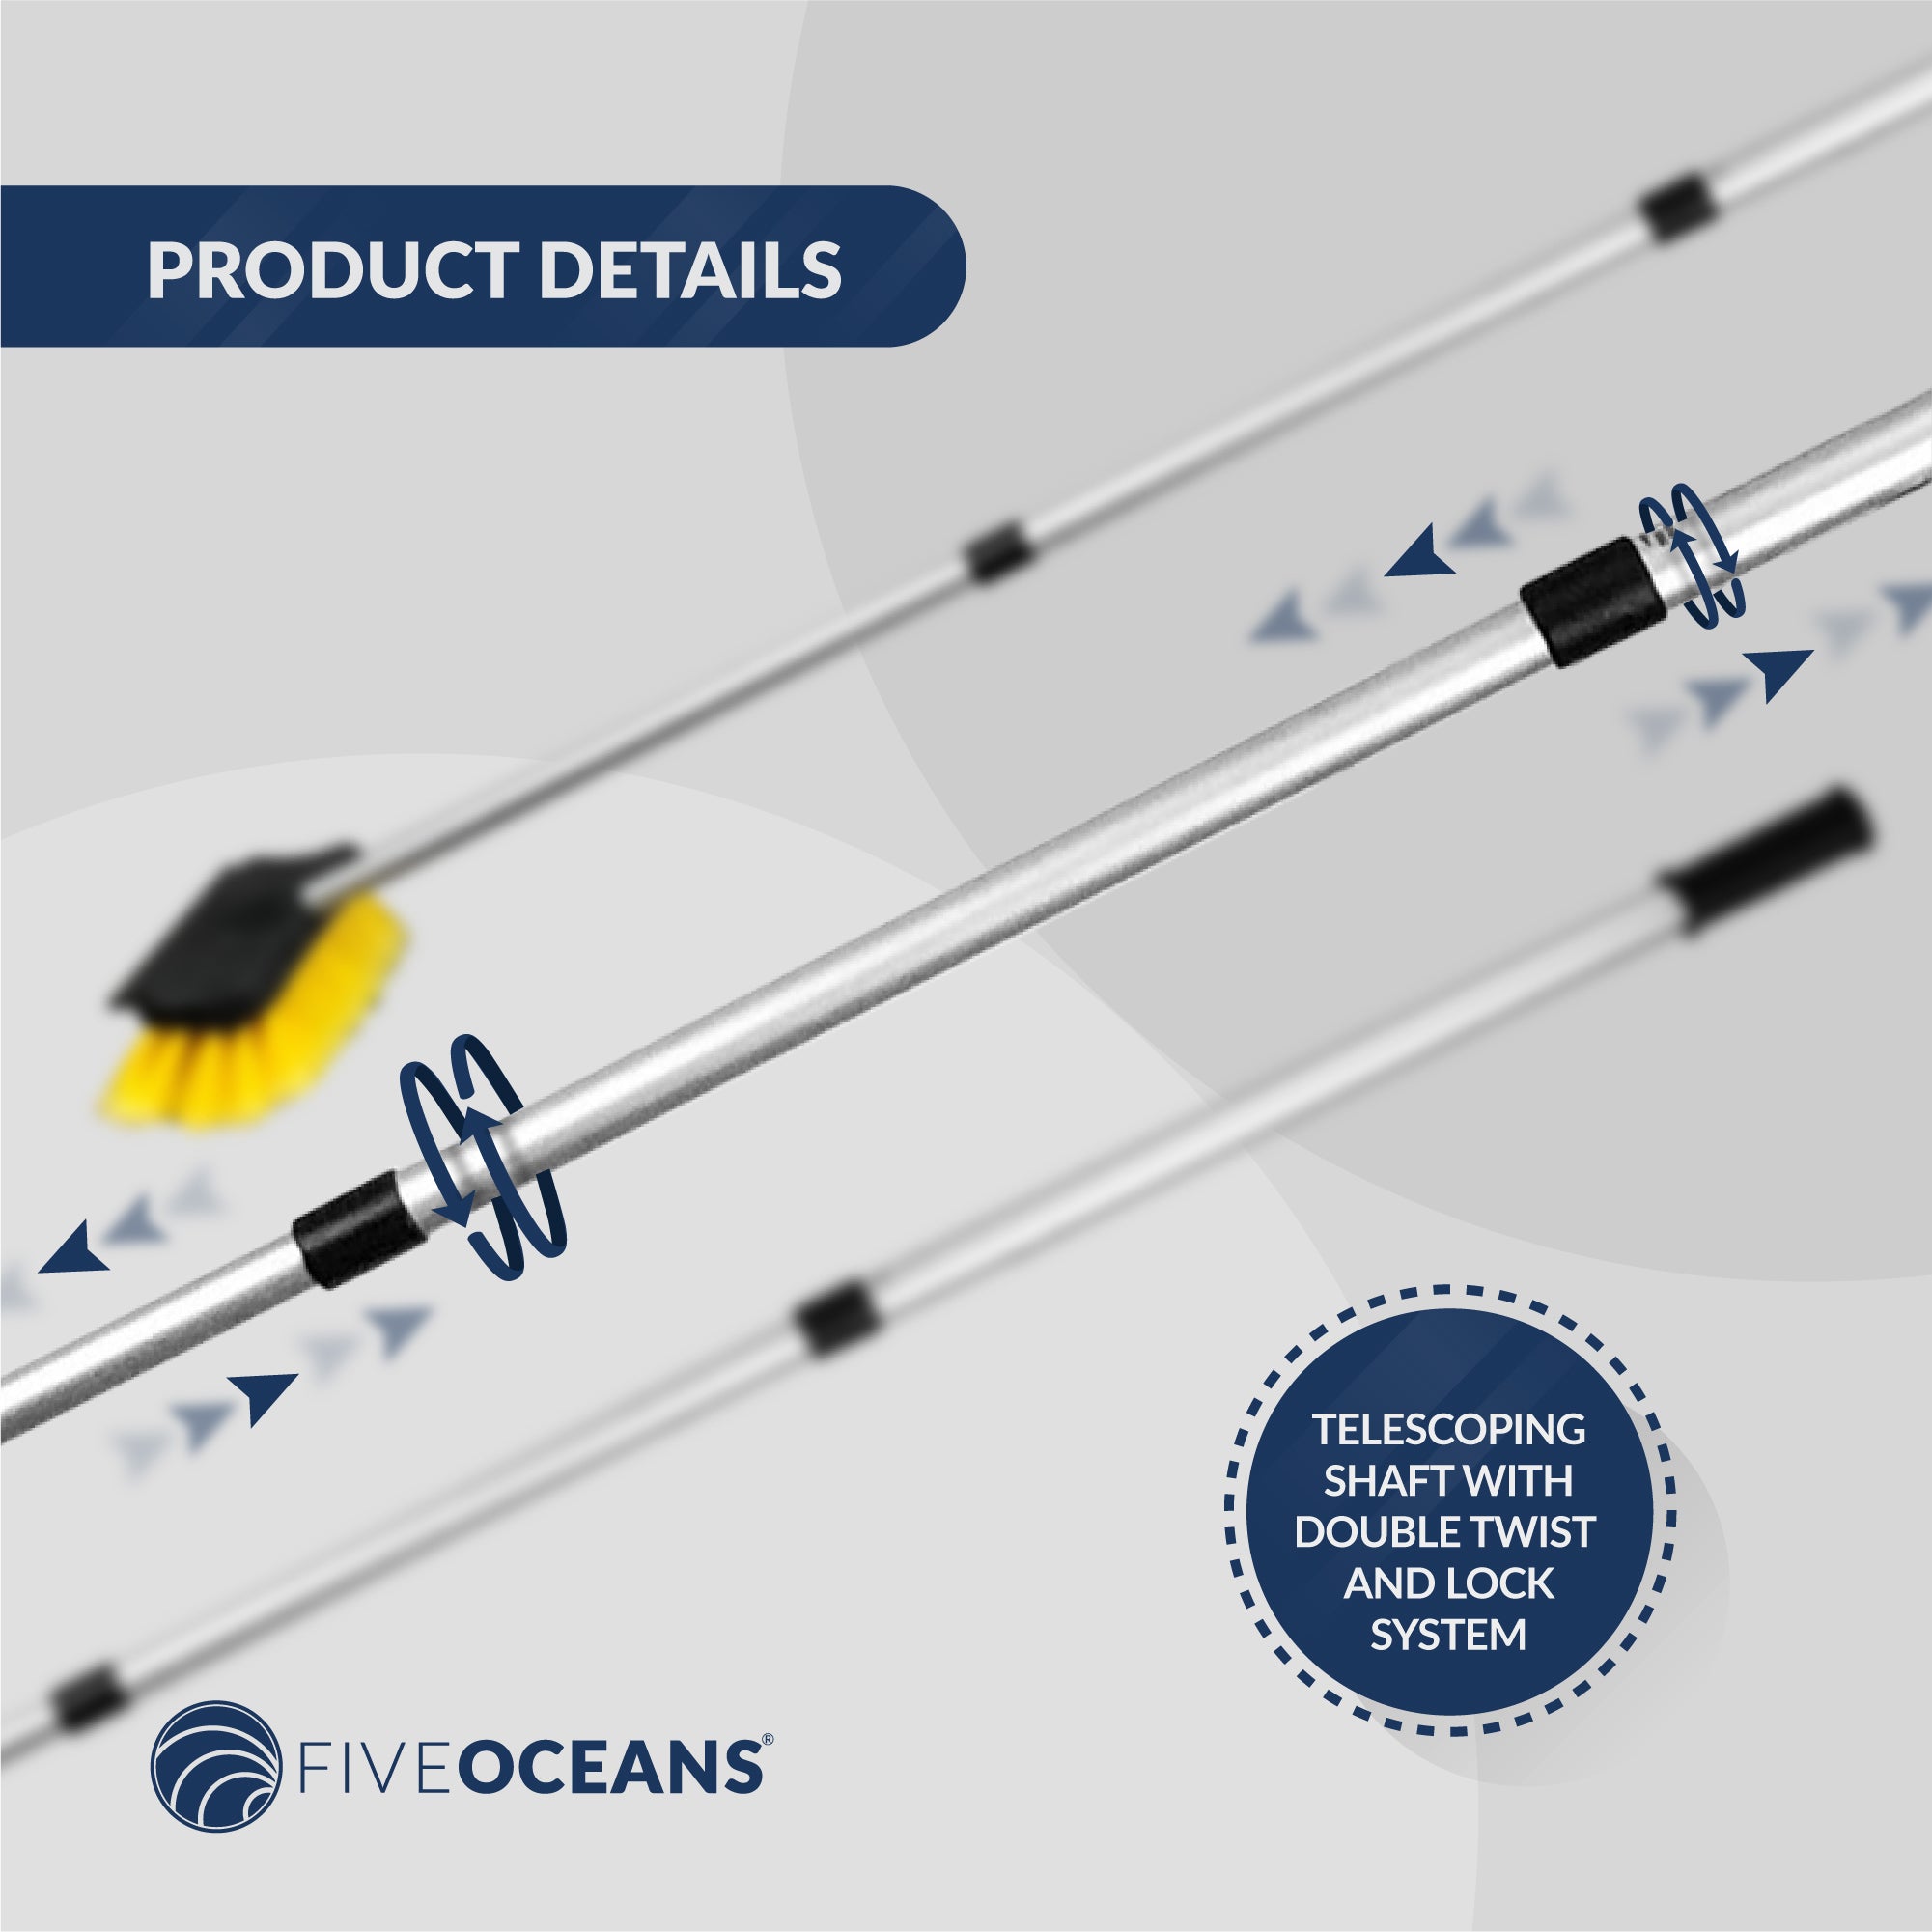 Five Oceans Deluxe Deck Kit w/ Brush, Mop, and Hook Fo-4264